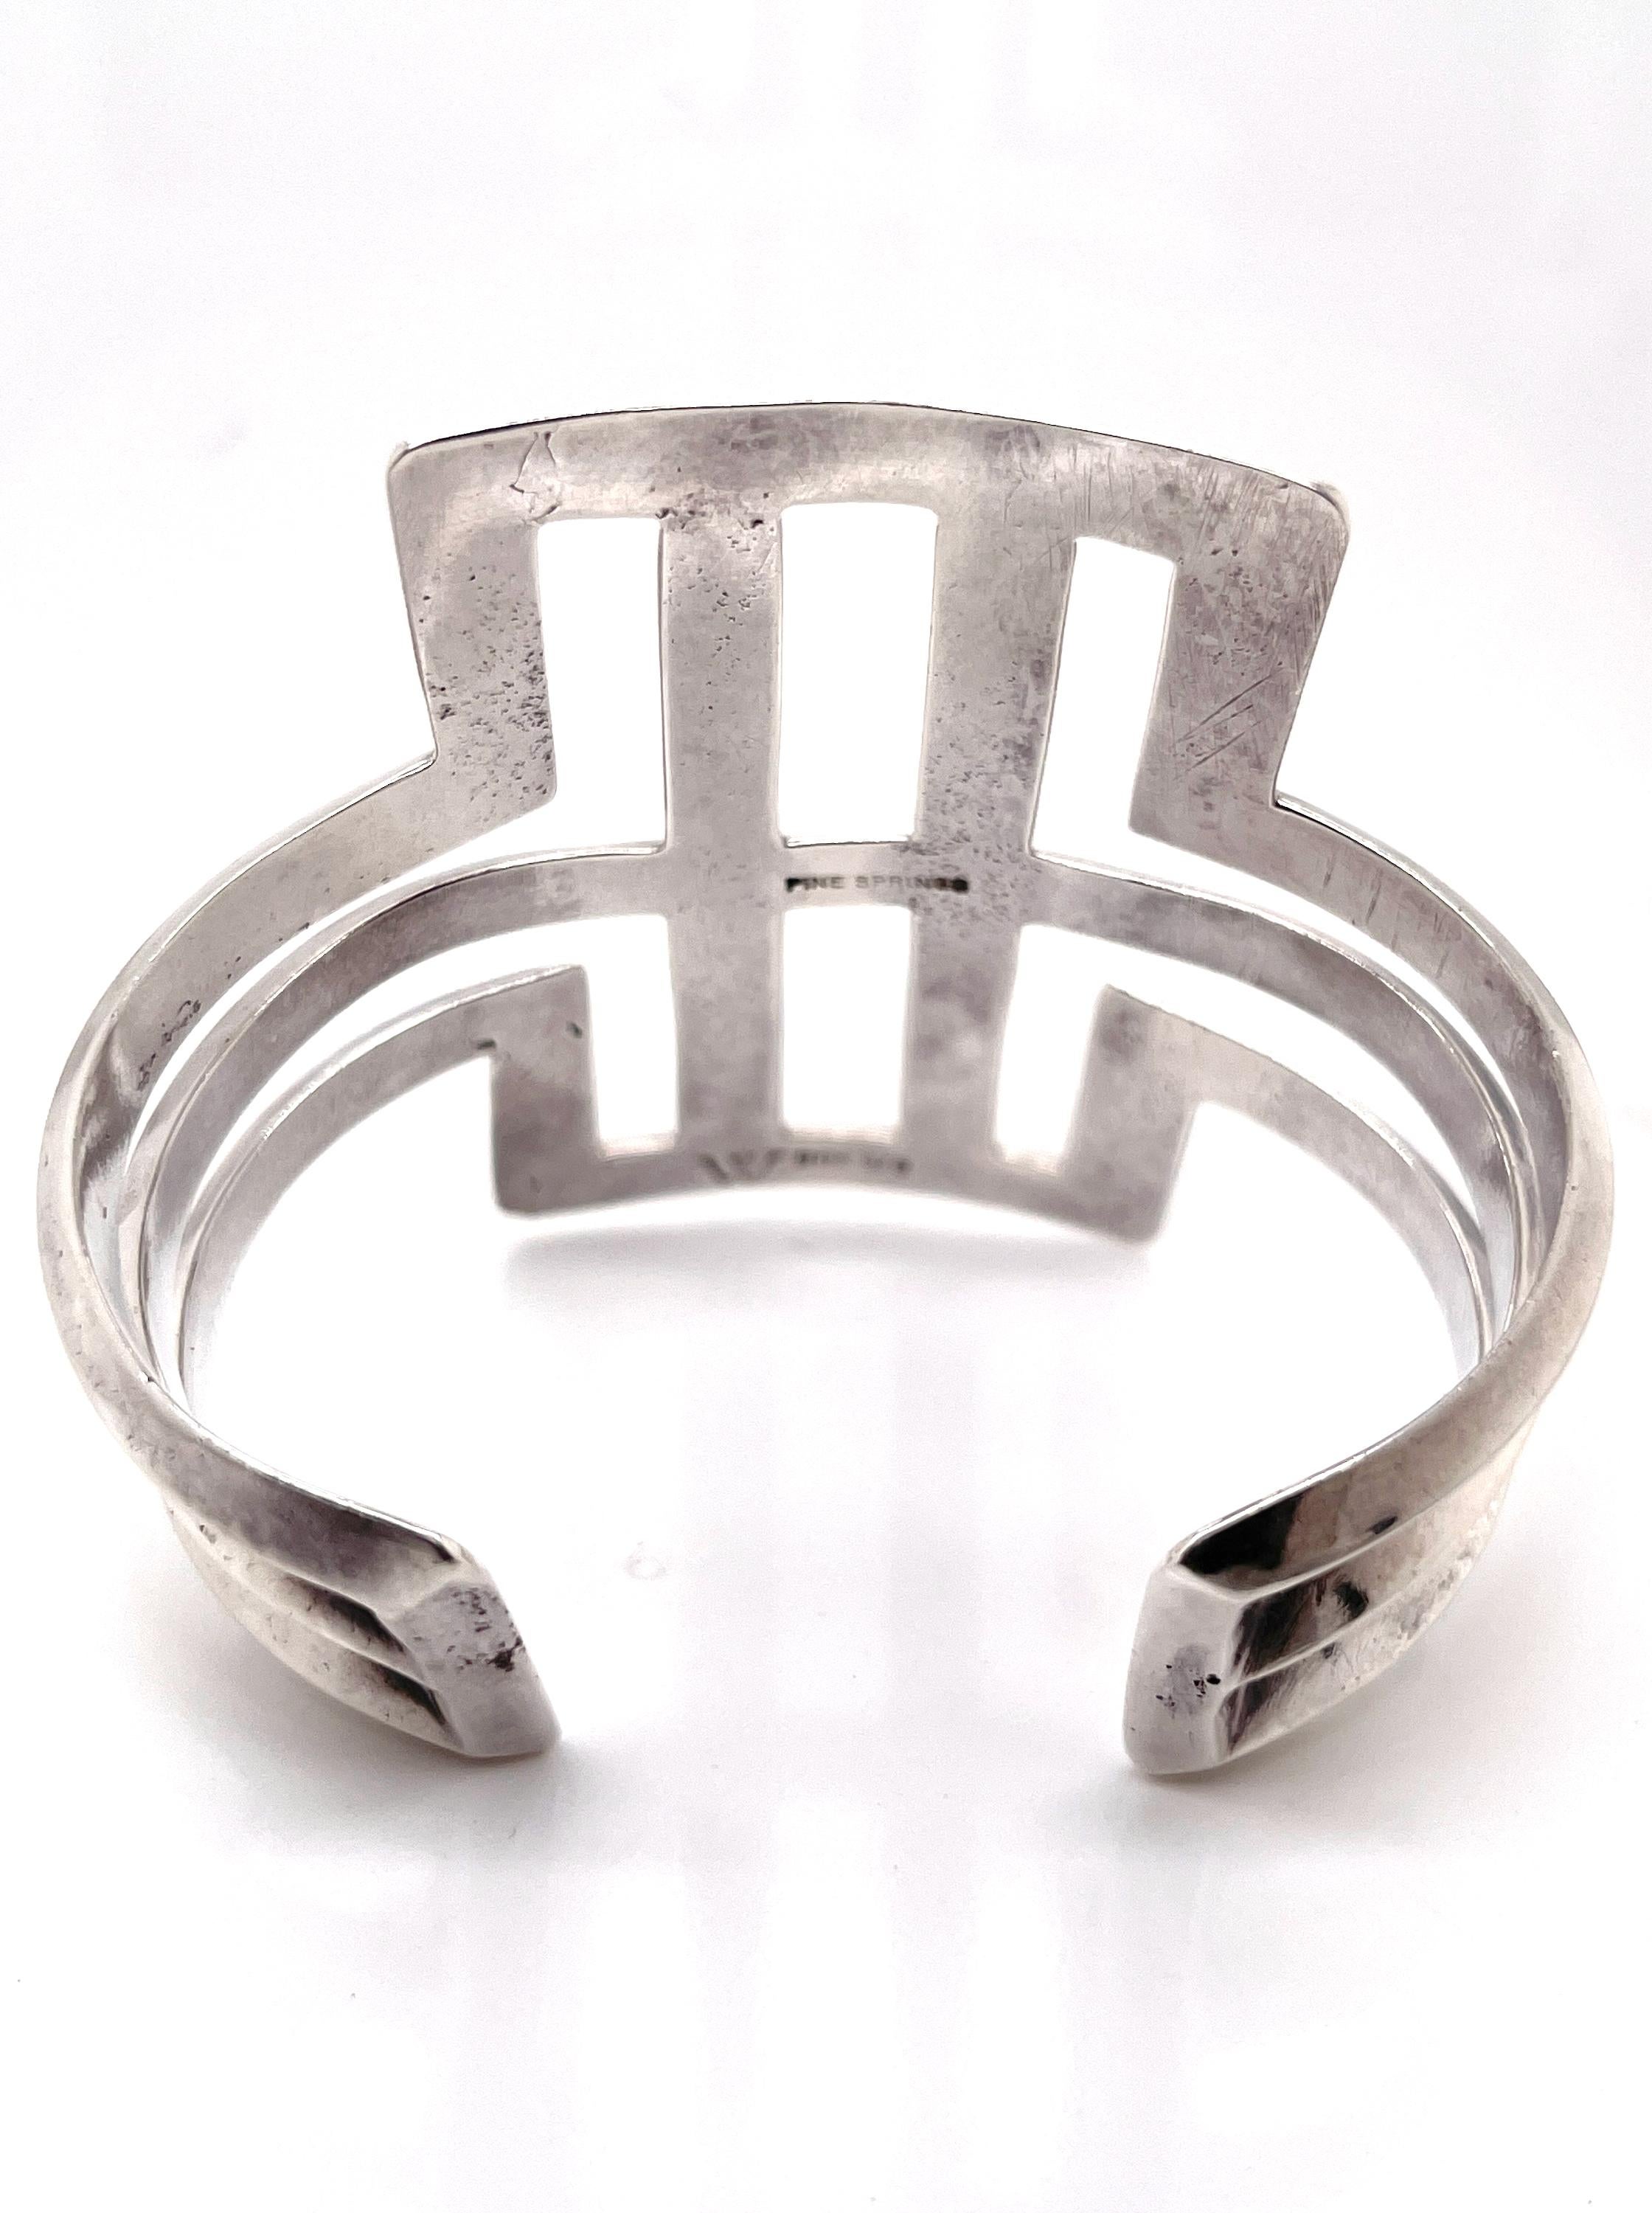 Pine Springs Cast Sterling Silver Navajo Bracelet from Woodward's Indian Shop For Sale 3